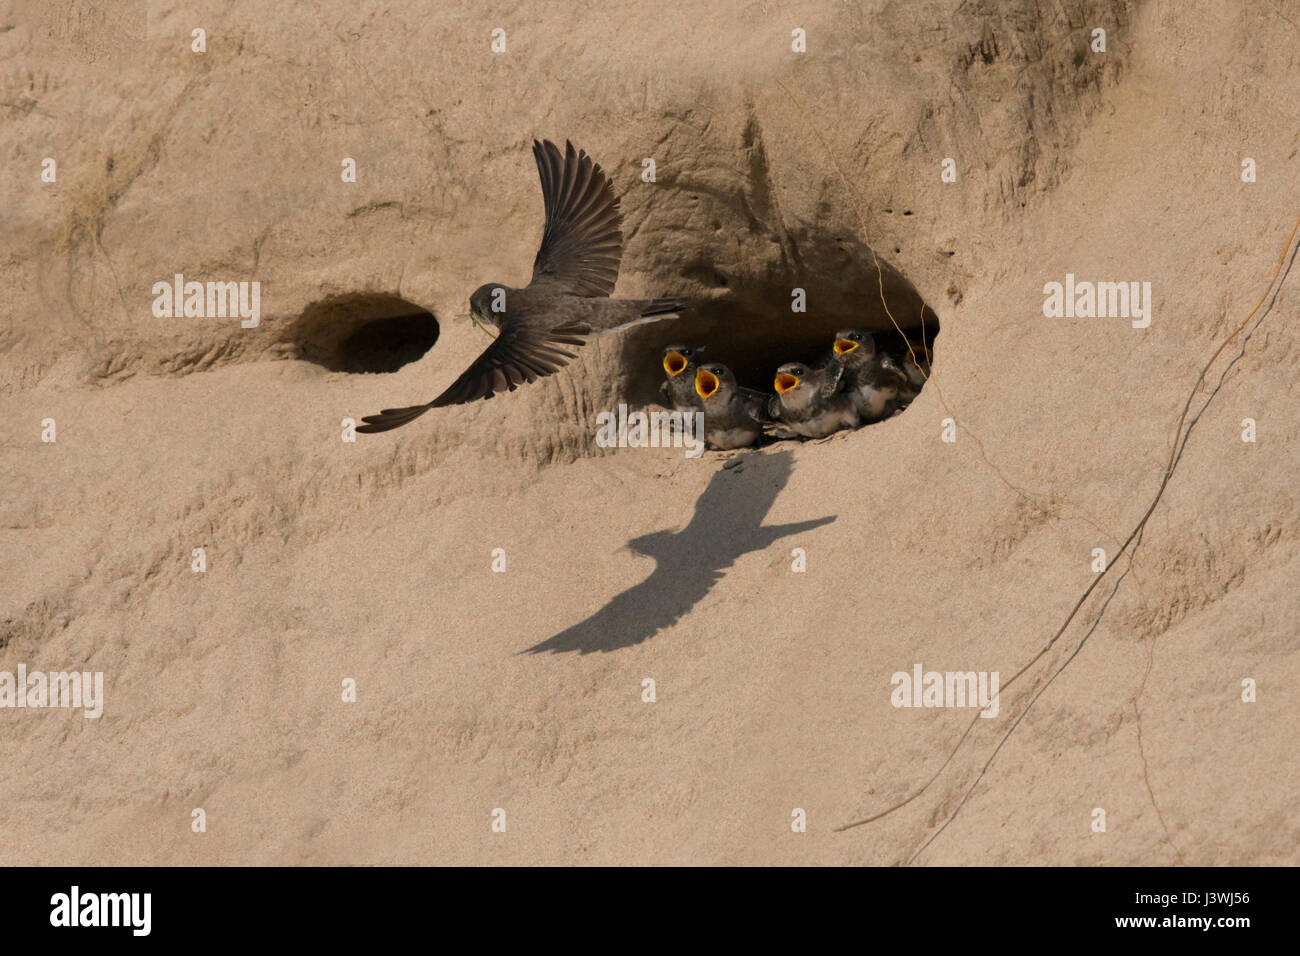 Bank Swallow chicks in sand dune nest call as adult flies in with food, reflected in shadow on sand Stock Photo